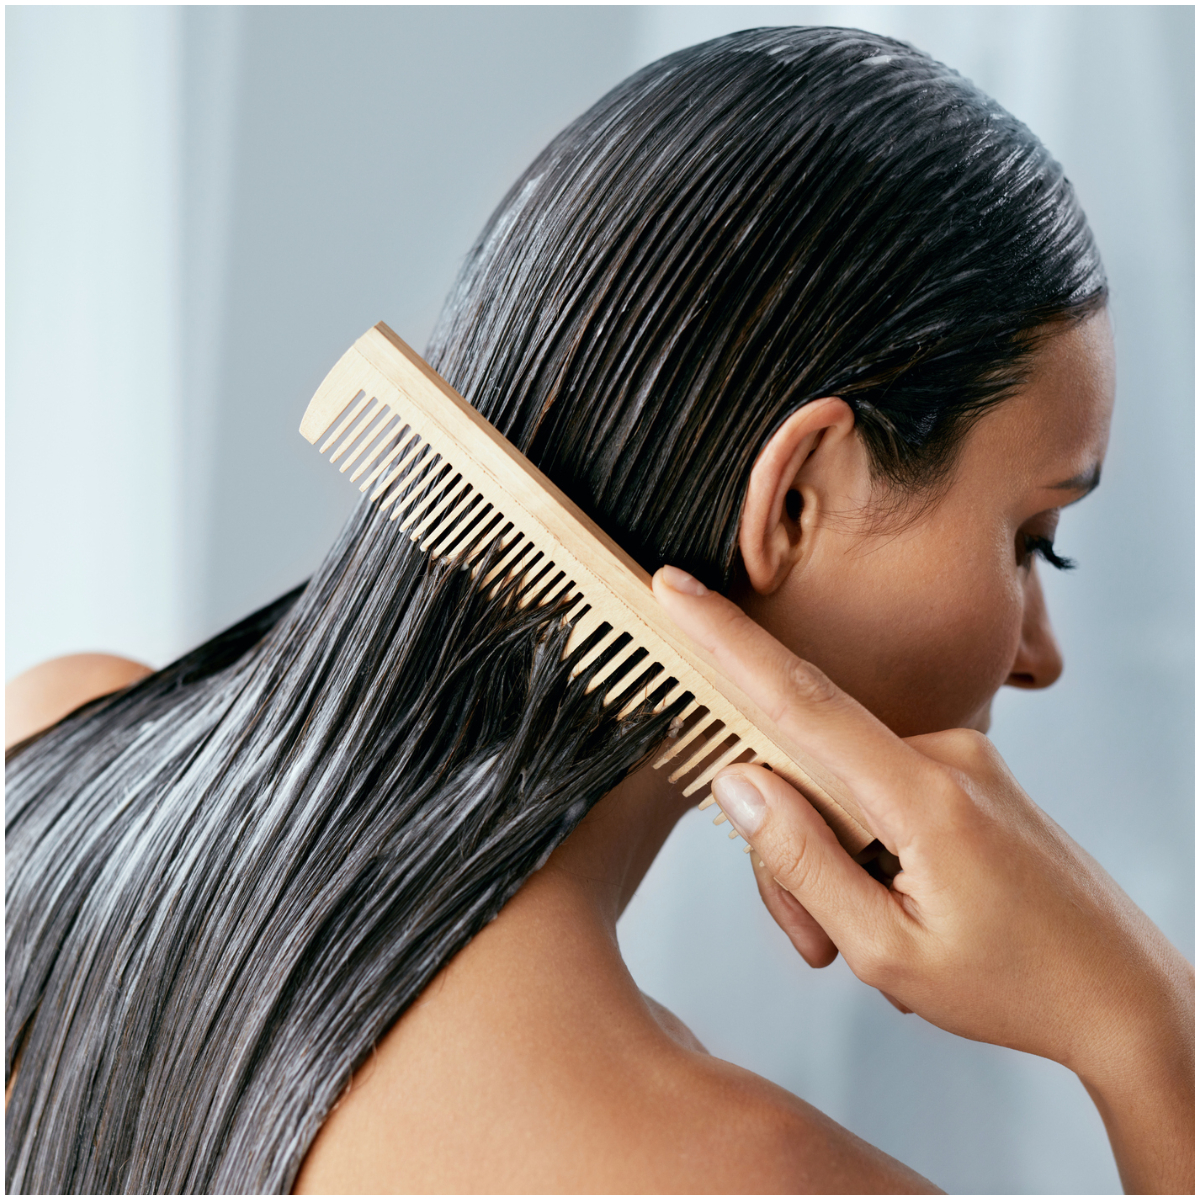 Do’s and Don’ts for combing wet hair explains cosmetologist Pooja Nagdev